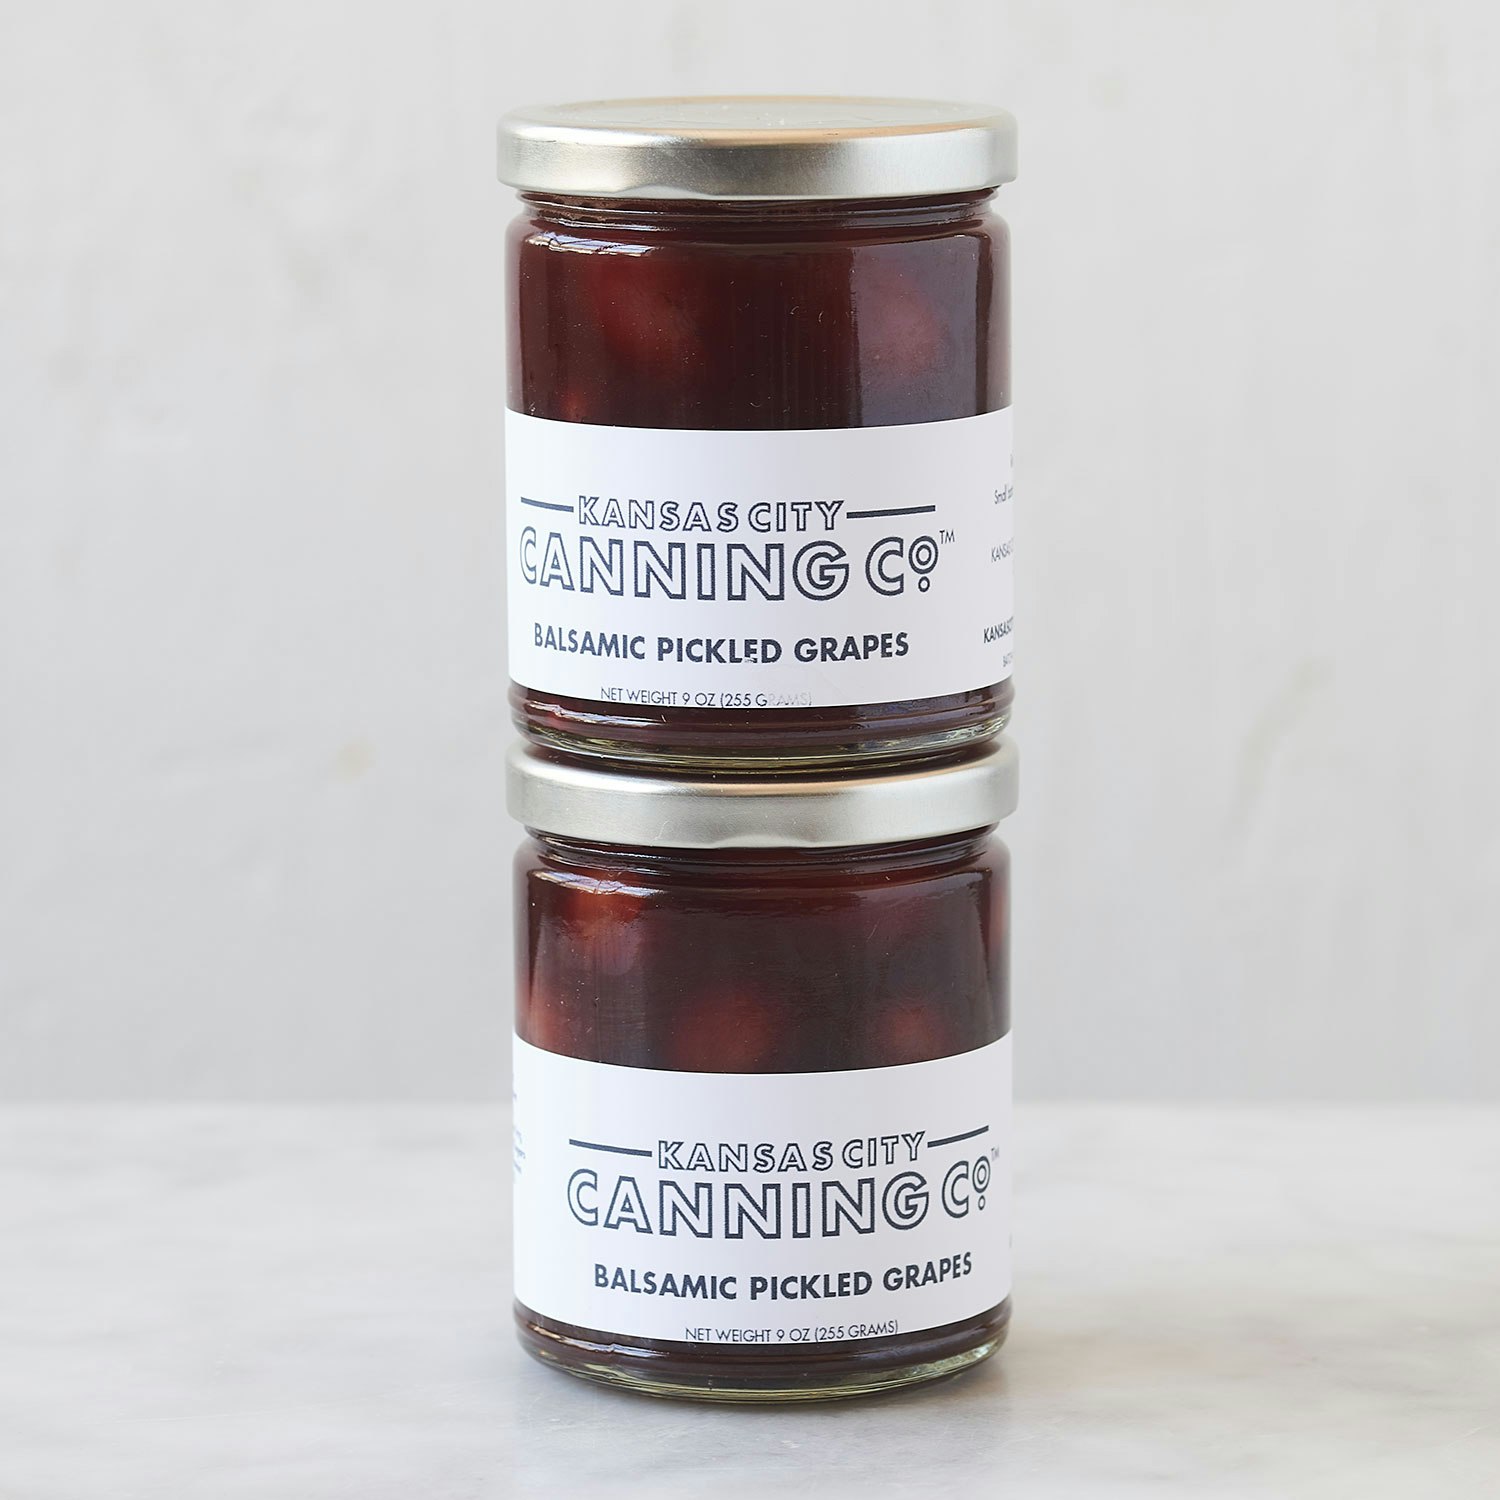 Kansas-City-Canning-Co-Balsamic-Pickled-Grapes-specialty-foods-126238-04